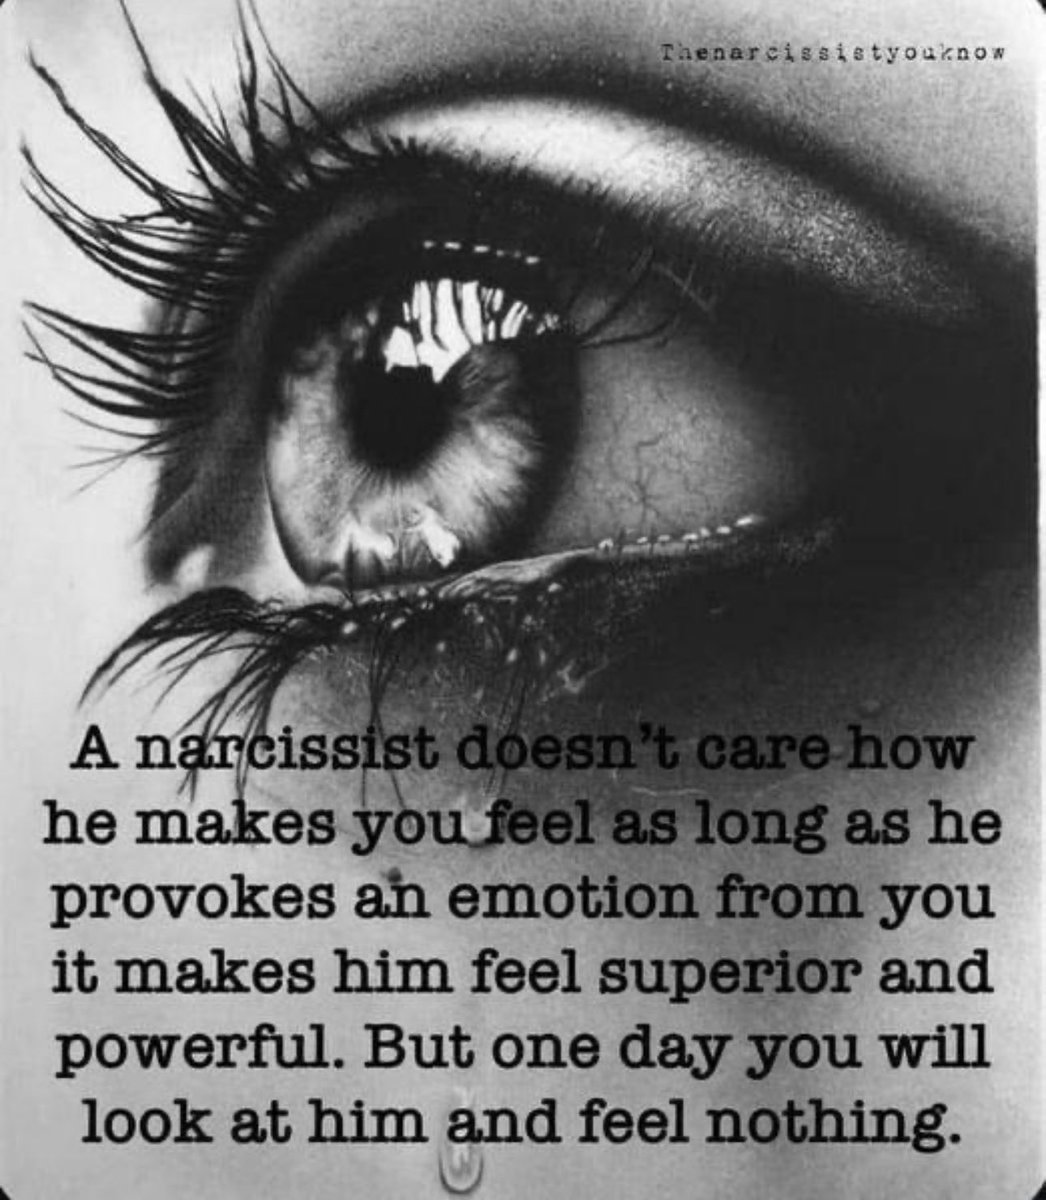 Don’t ever give a narcissist power over you. They will cry like a baby when they find out you have power over them. Because you are much more powerful!!